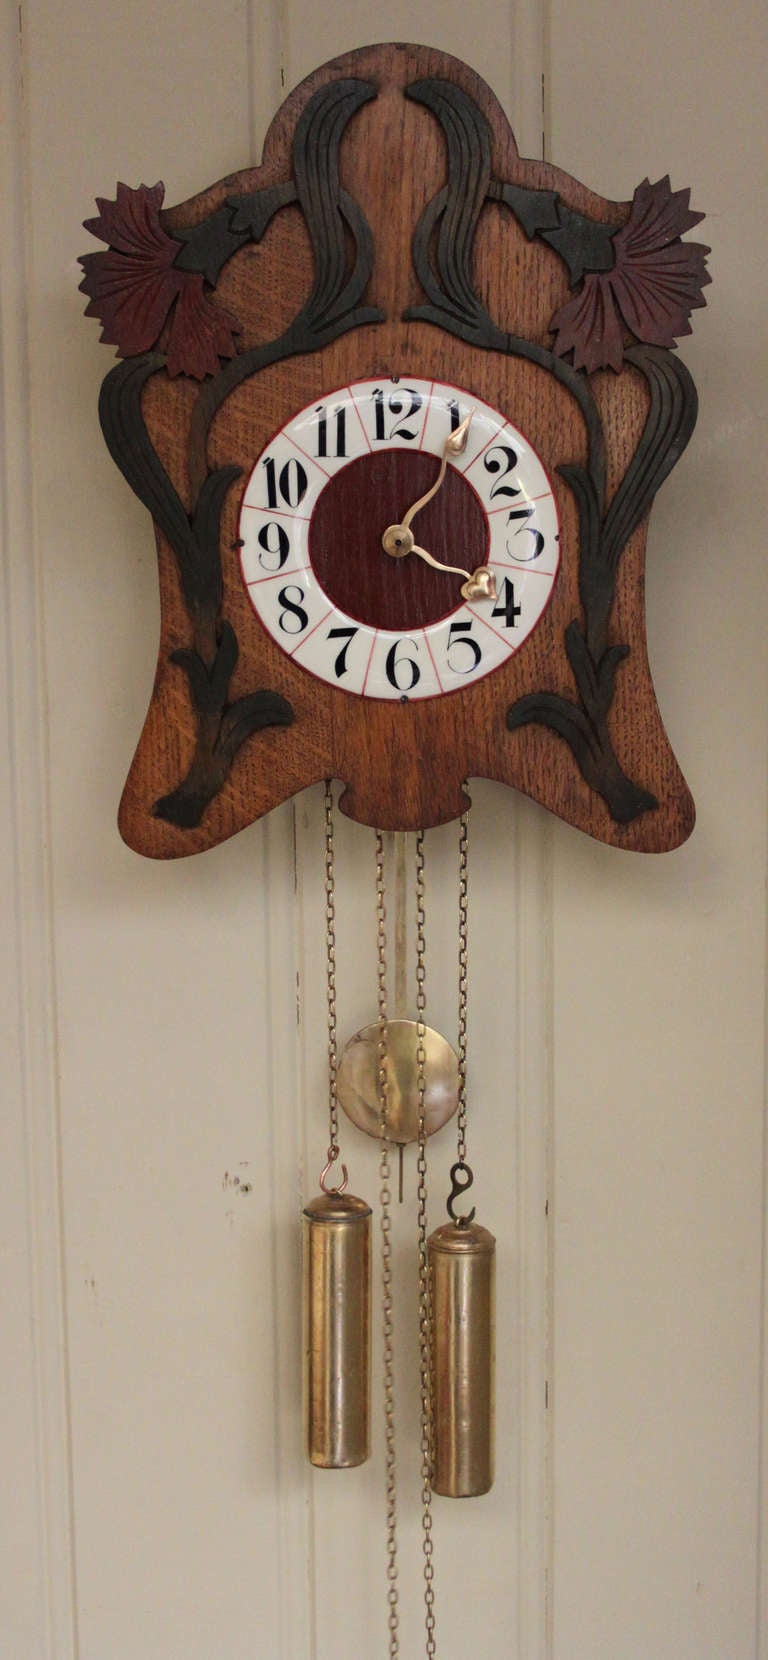 An unusual Art Nouveau wall clock from the Black Forest. It has an oak front with carved, colored applied vine leaves, and an enamel chapter ring with red lines and block numerals. It has a wooden plated movement with bass weights and pendulum that